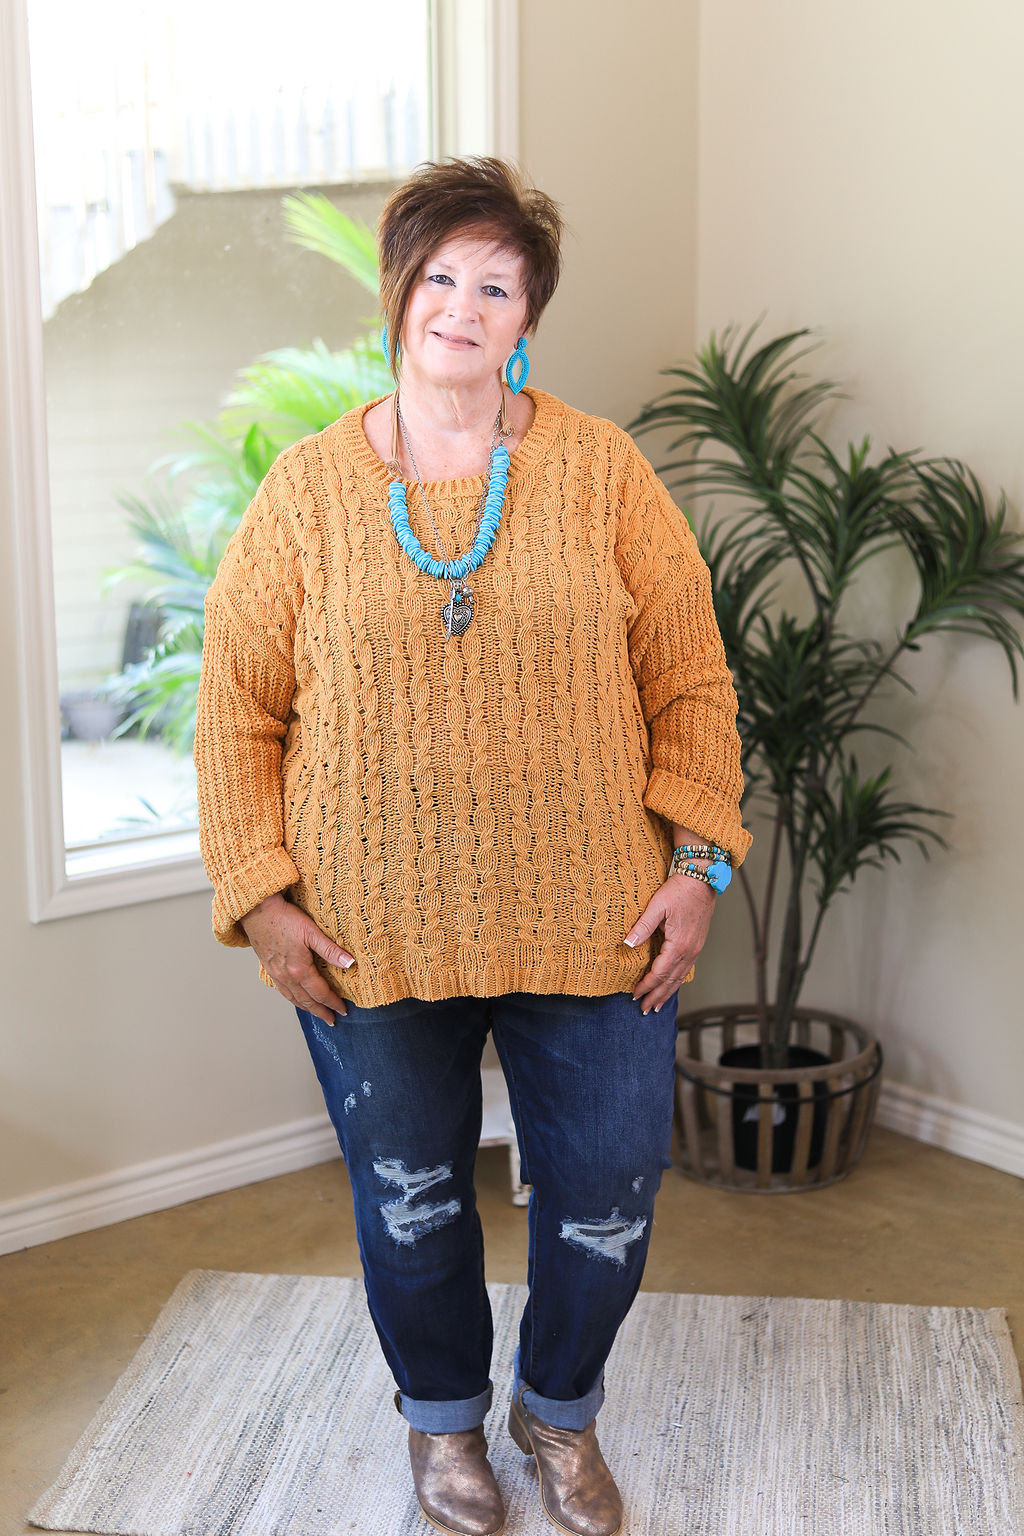 On My Level Chenille Cable Knit Pullover Sweater in Mustard Yellow - Giddy Up Glamour Boutique